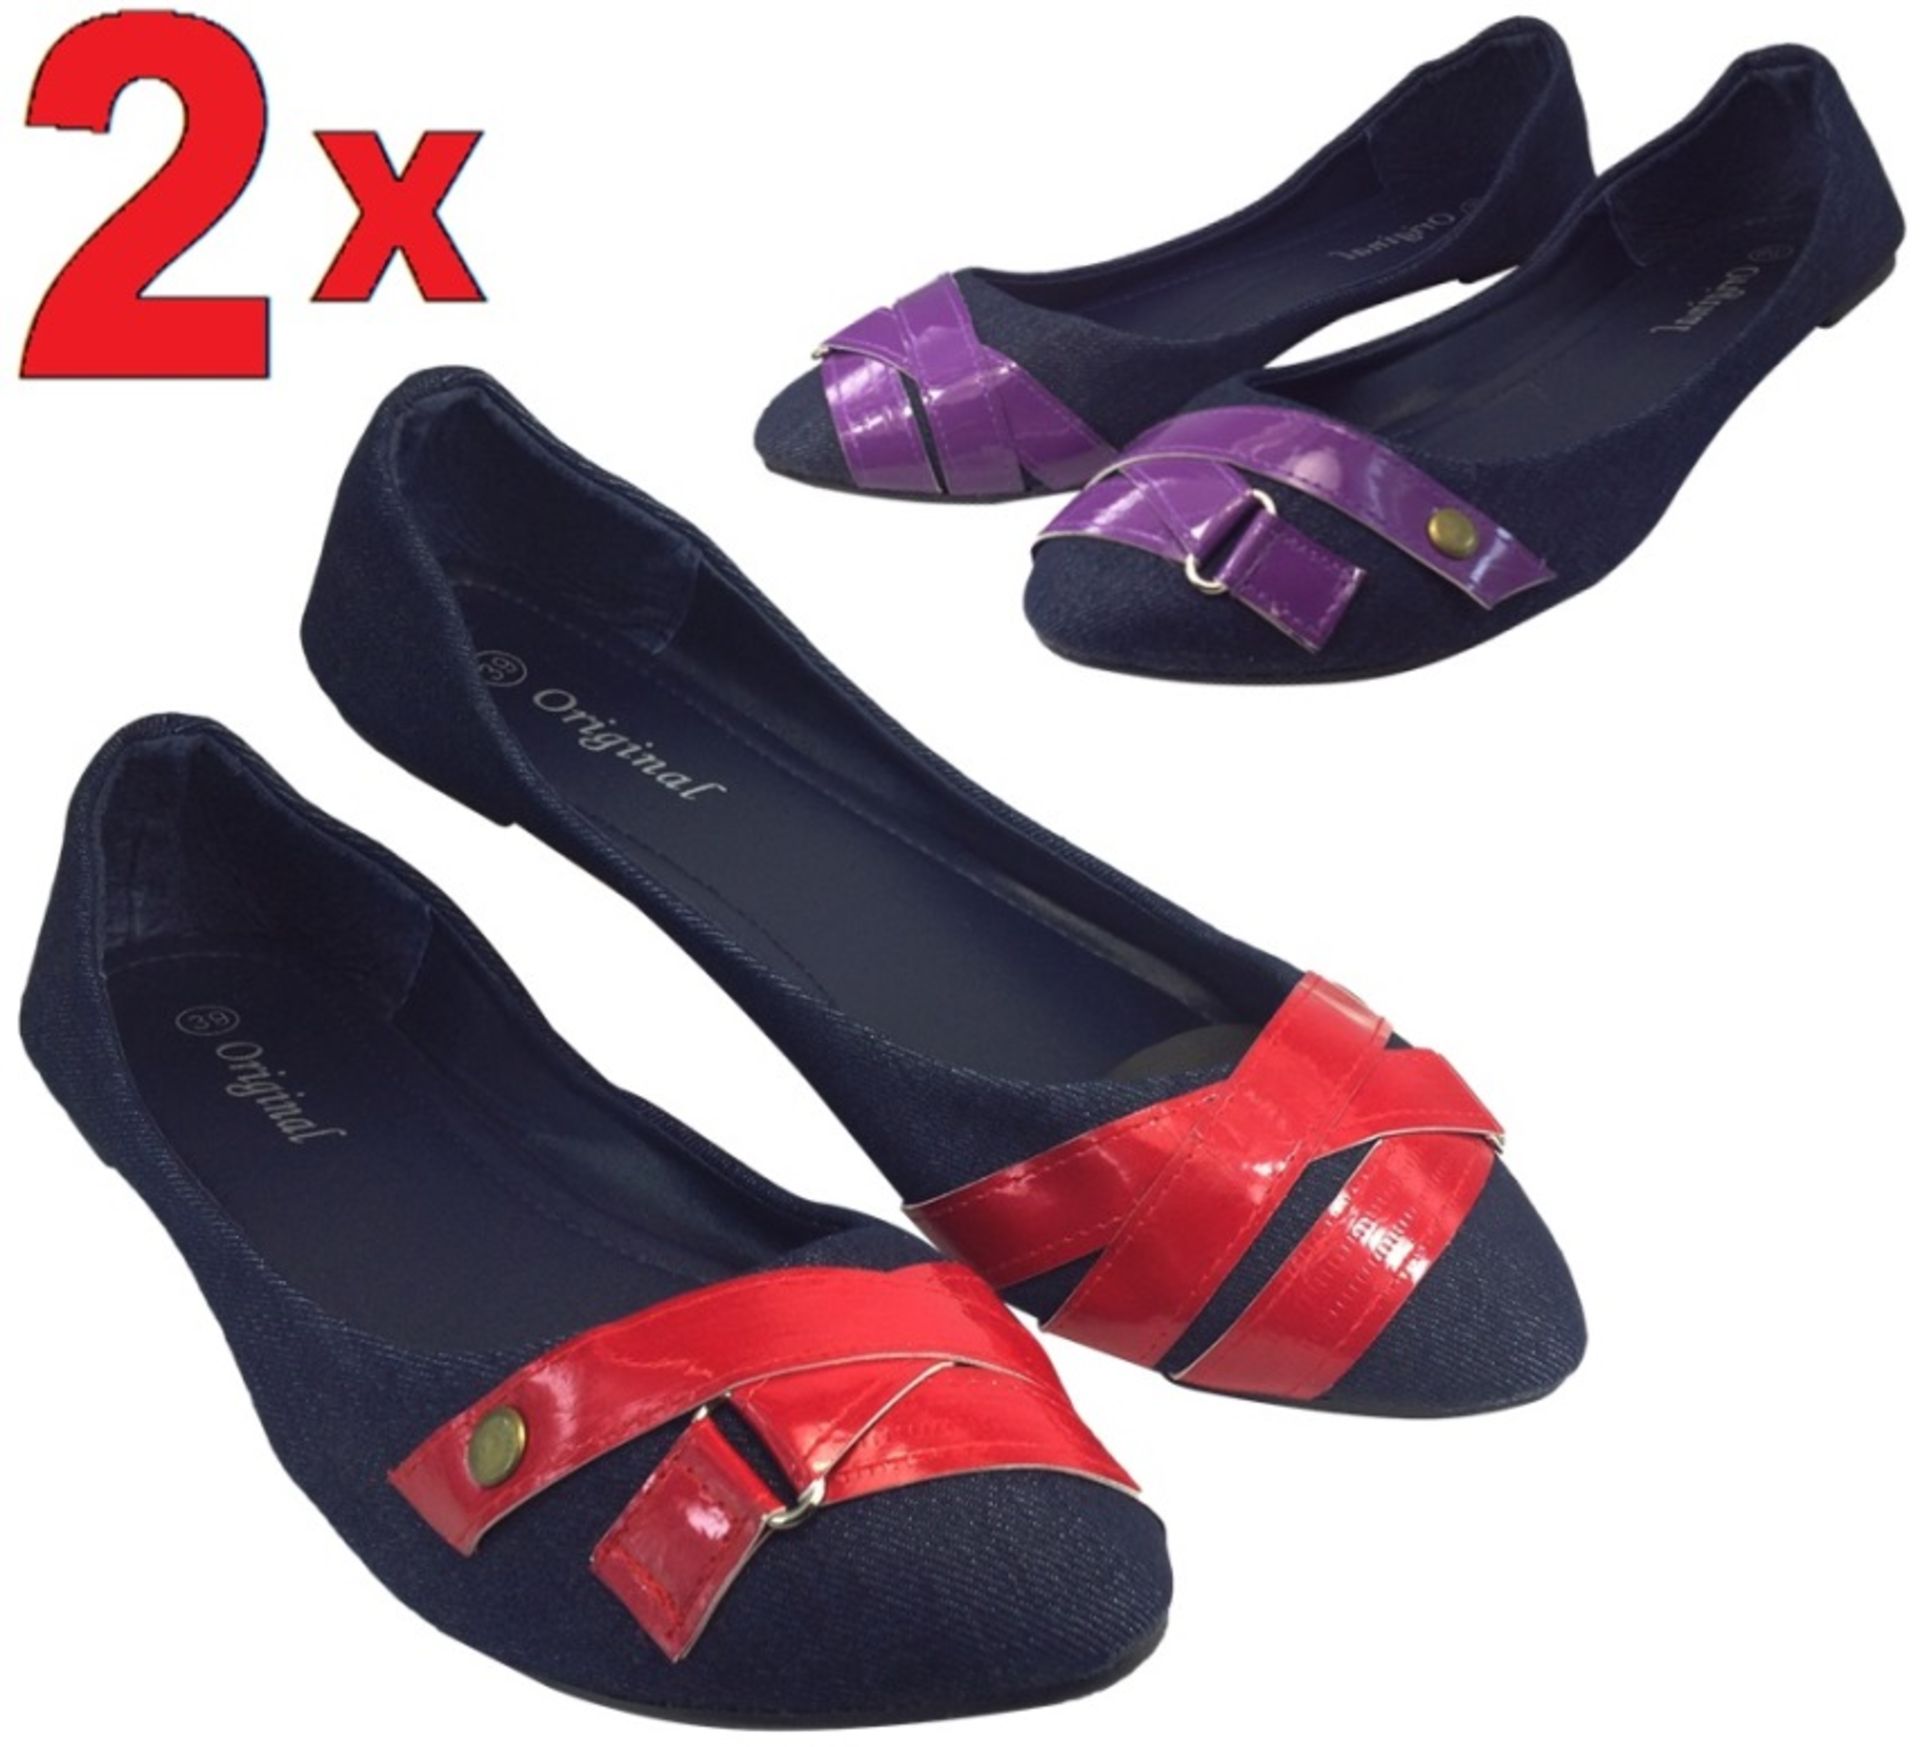 2x Ladies Dolly Flat Shoes - Denim Blue Colour Design for Summer Holiday Office with Red & Purple